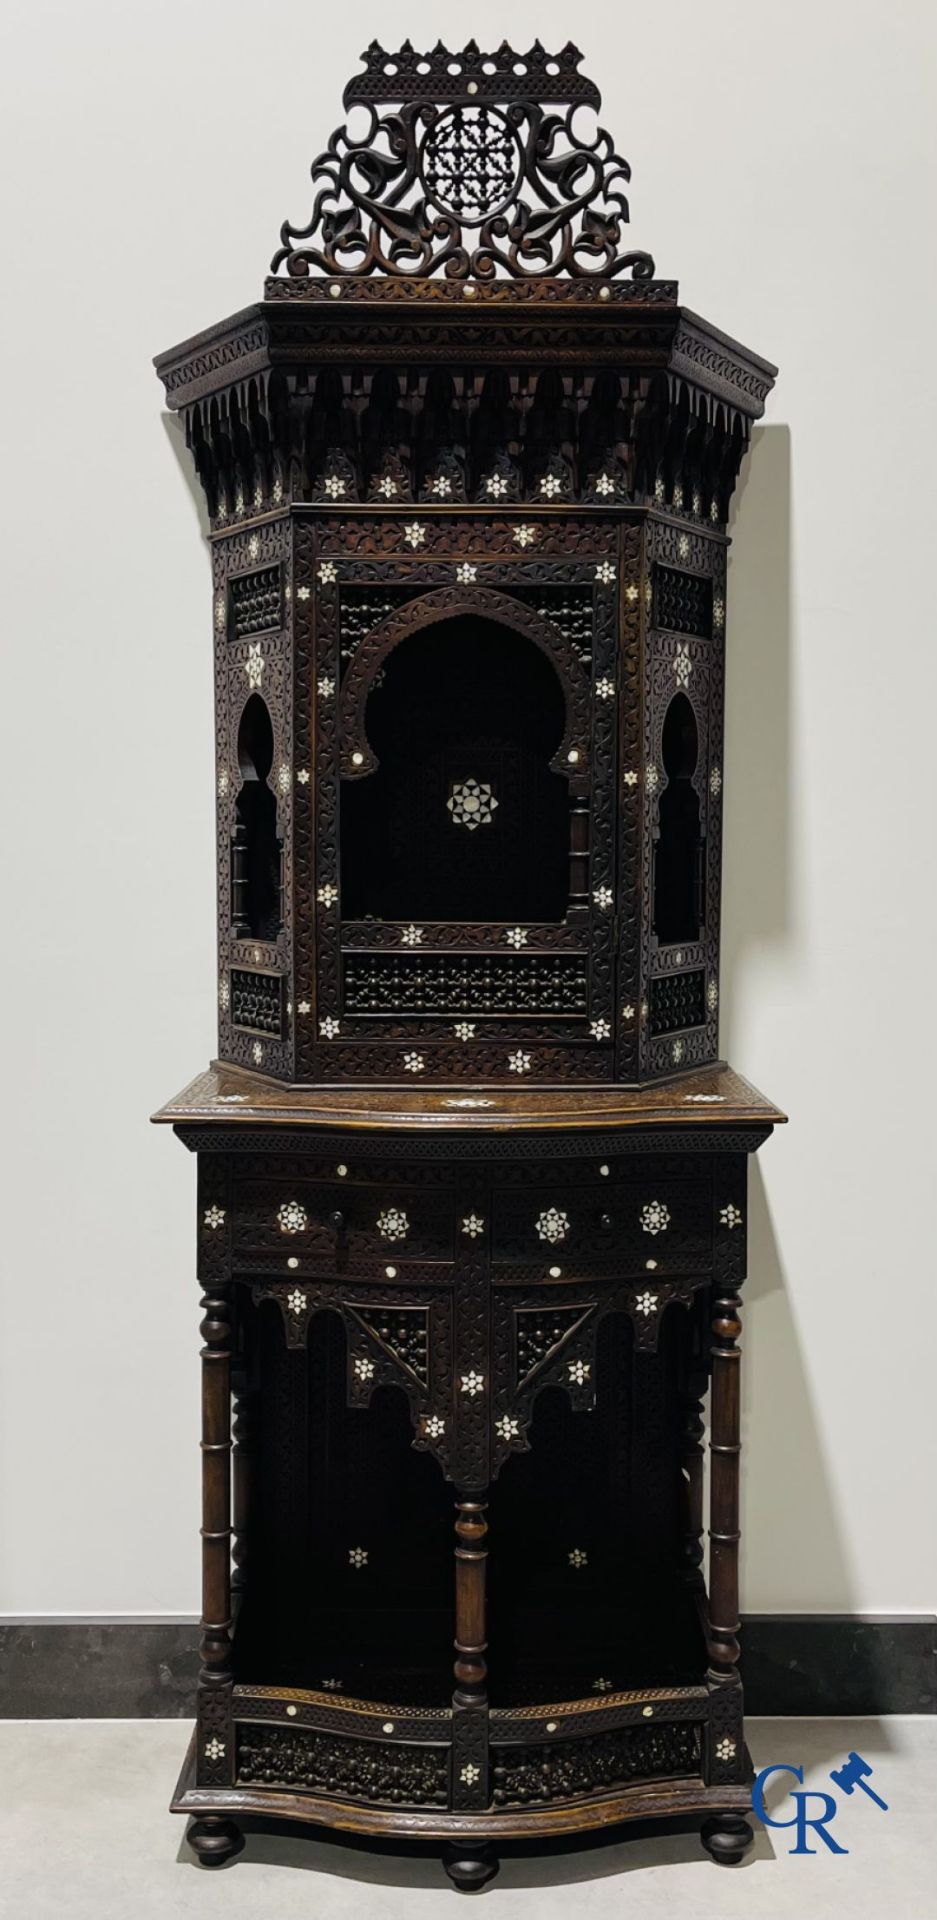 Sculpted furniture with inlays of ebony and mother-of-pearl. Syria, early 19th century. - Image 3 of 22